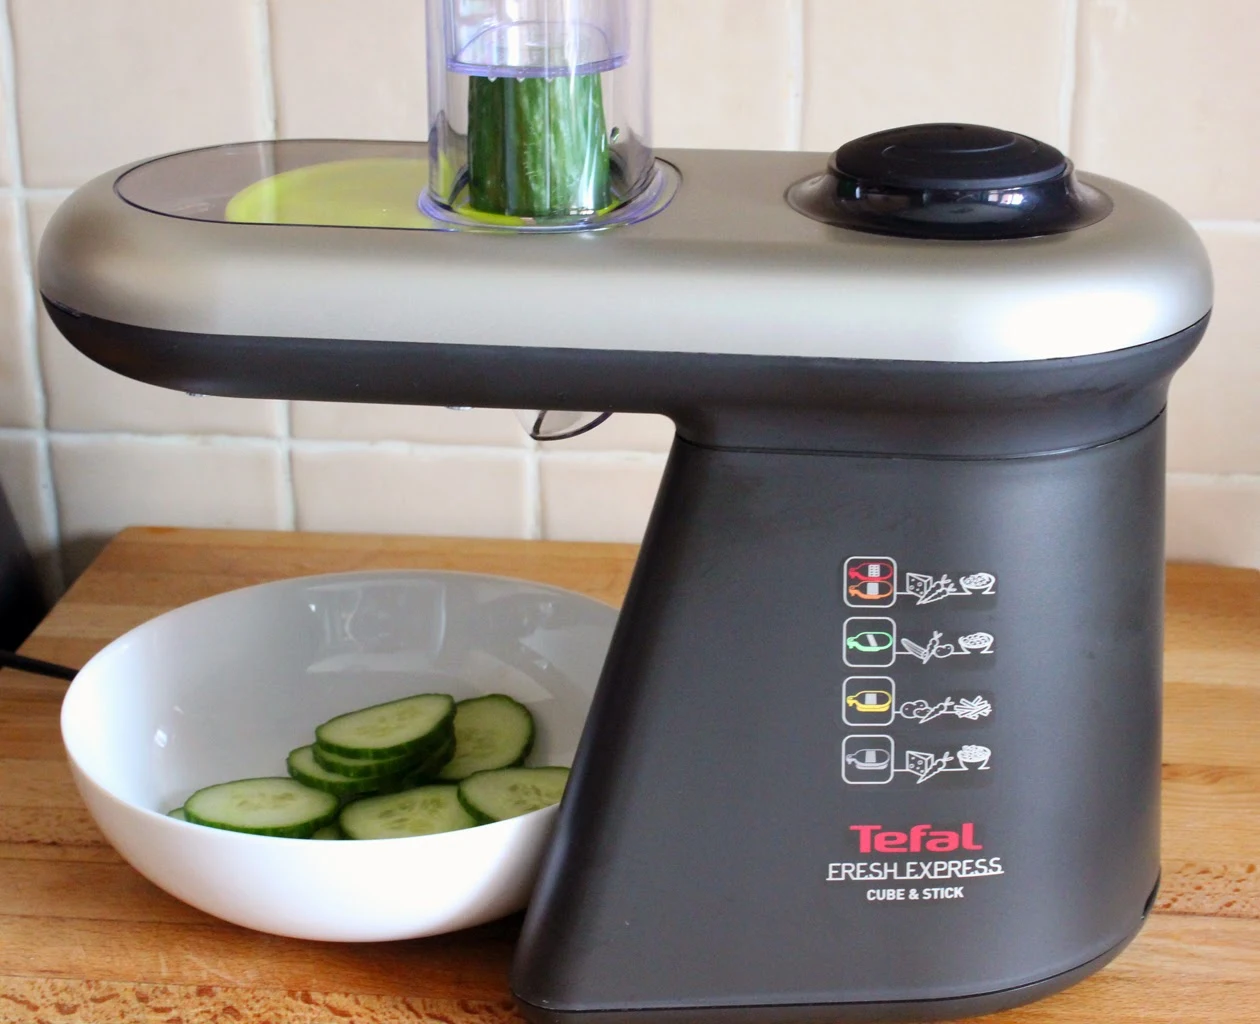 Tefal Fresh Express Cube and Stick slicing cucumber